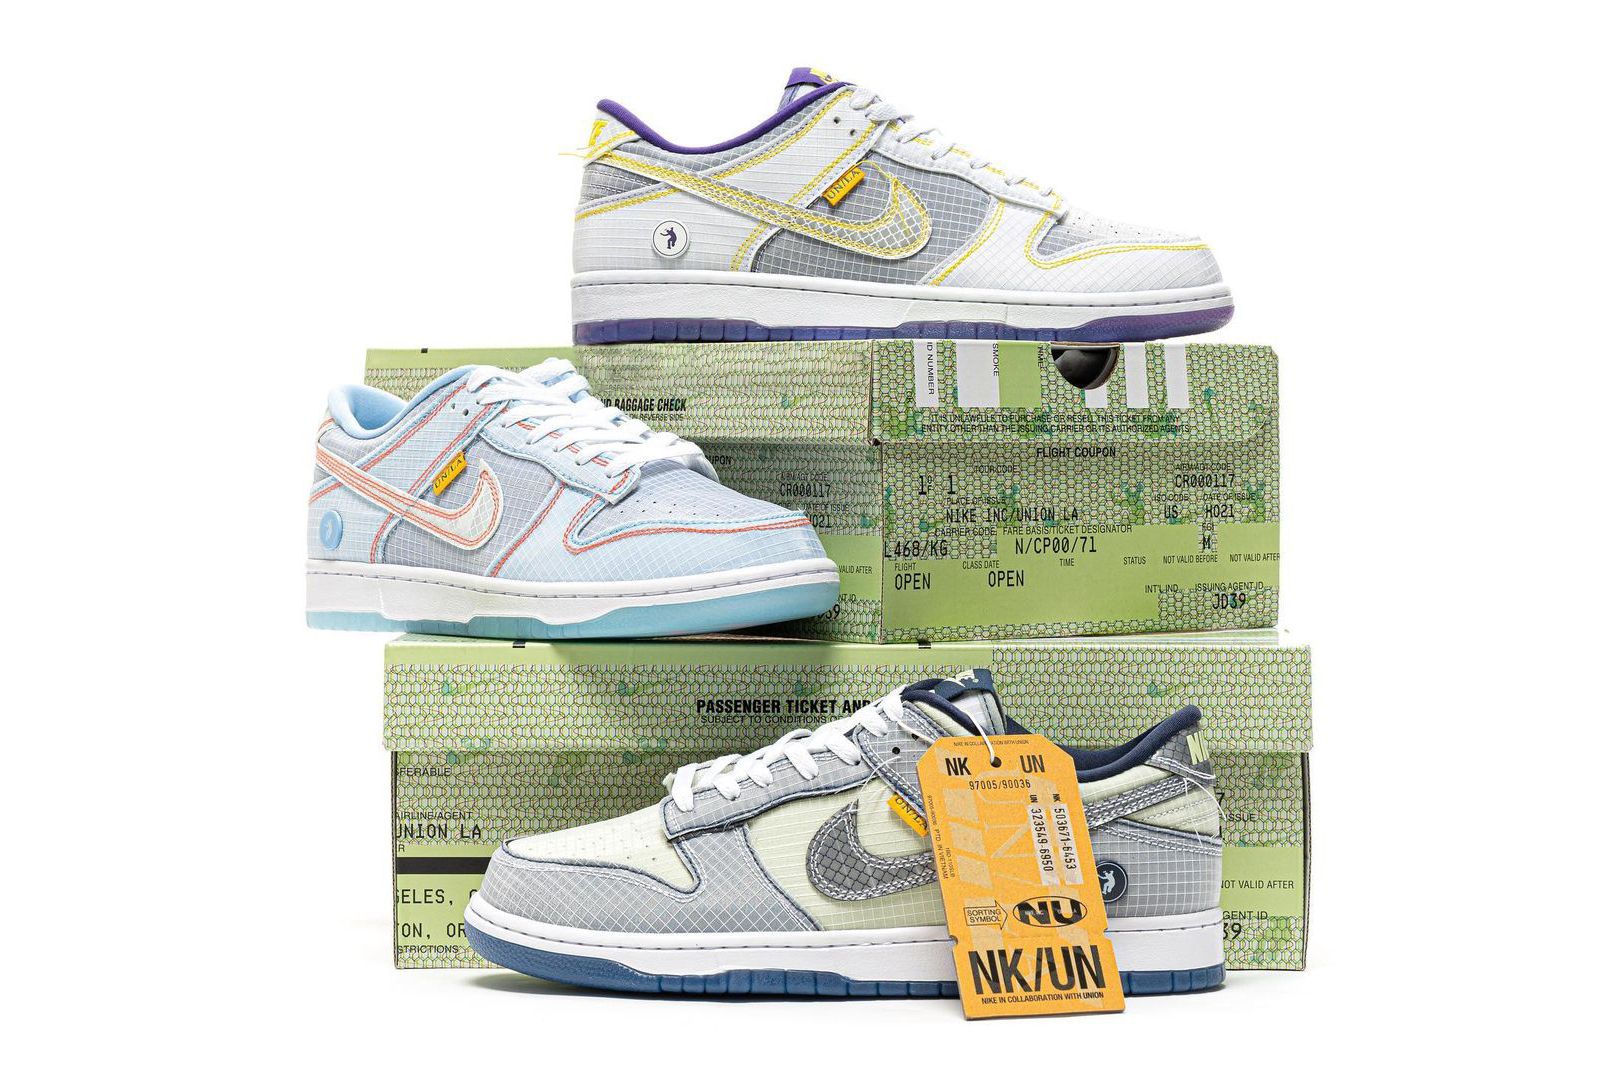 Union Announce Release Info For Their Nike Dunk Low